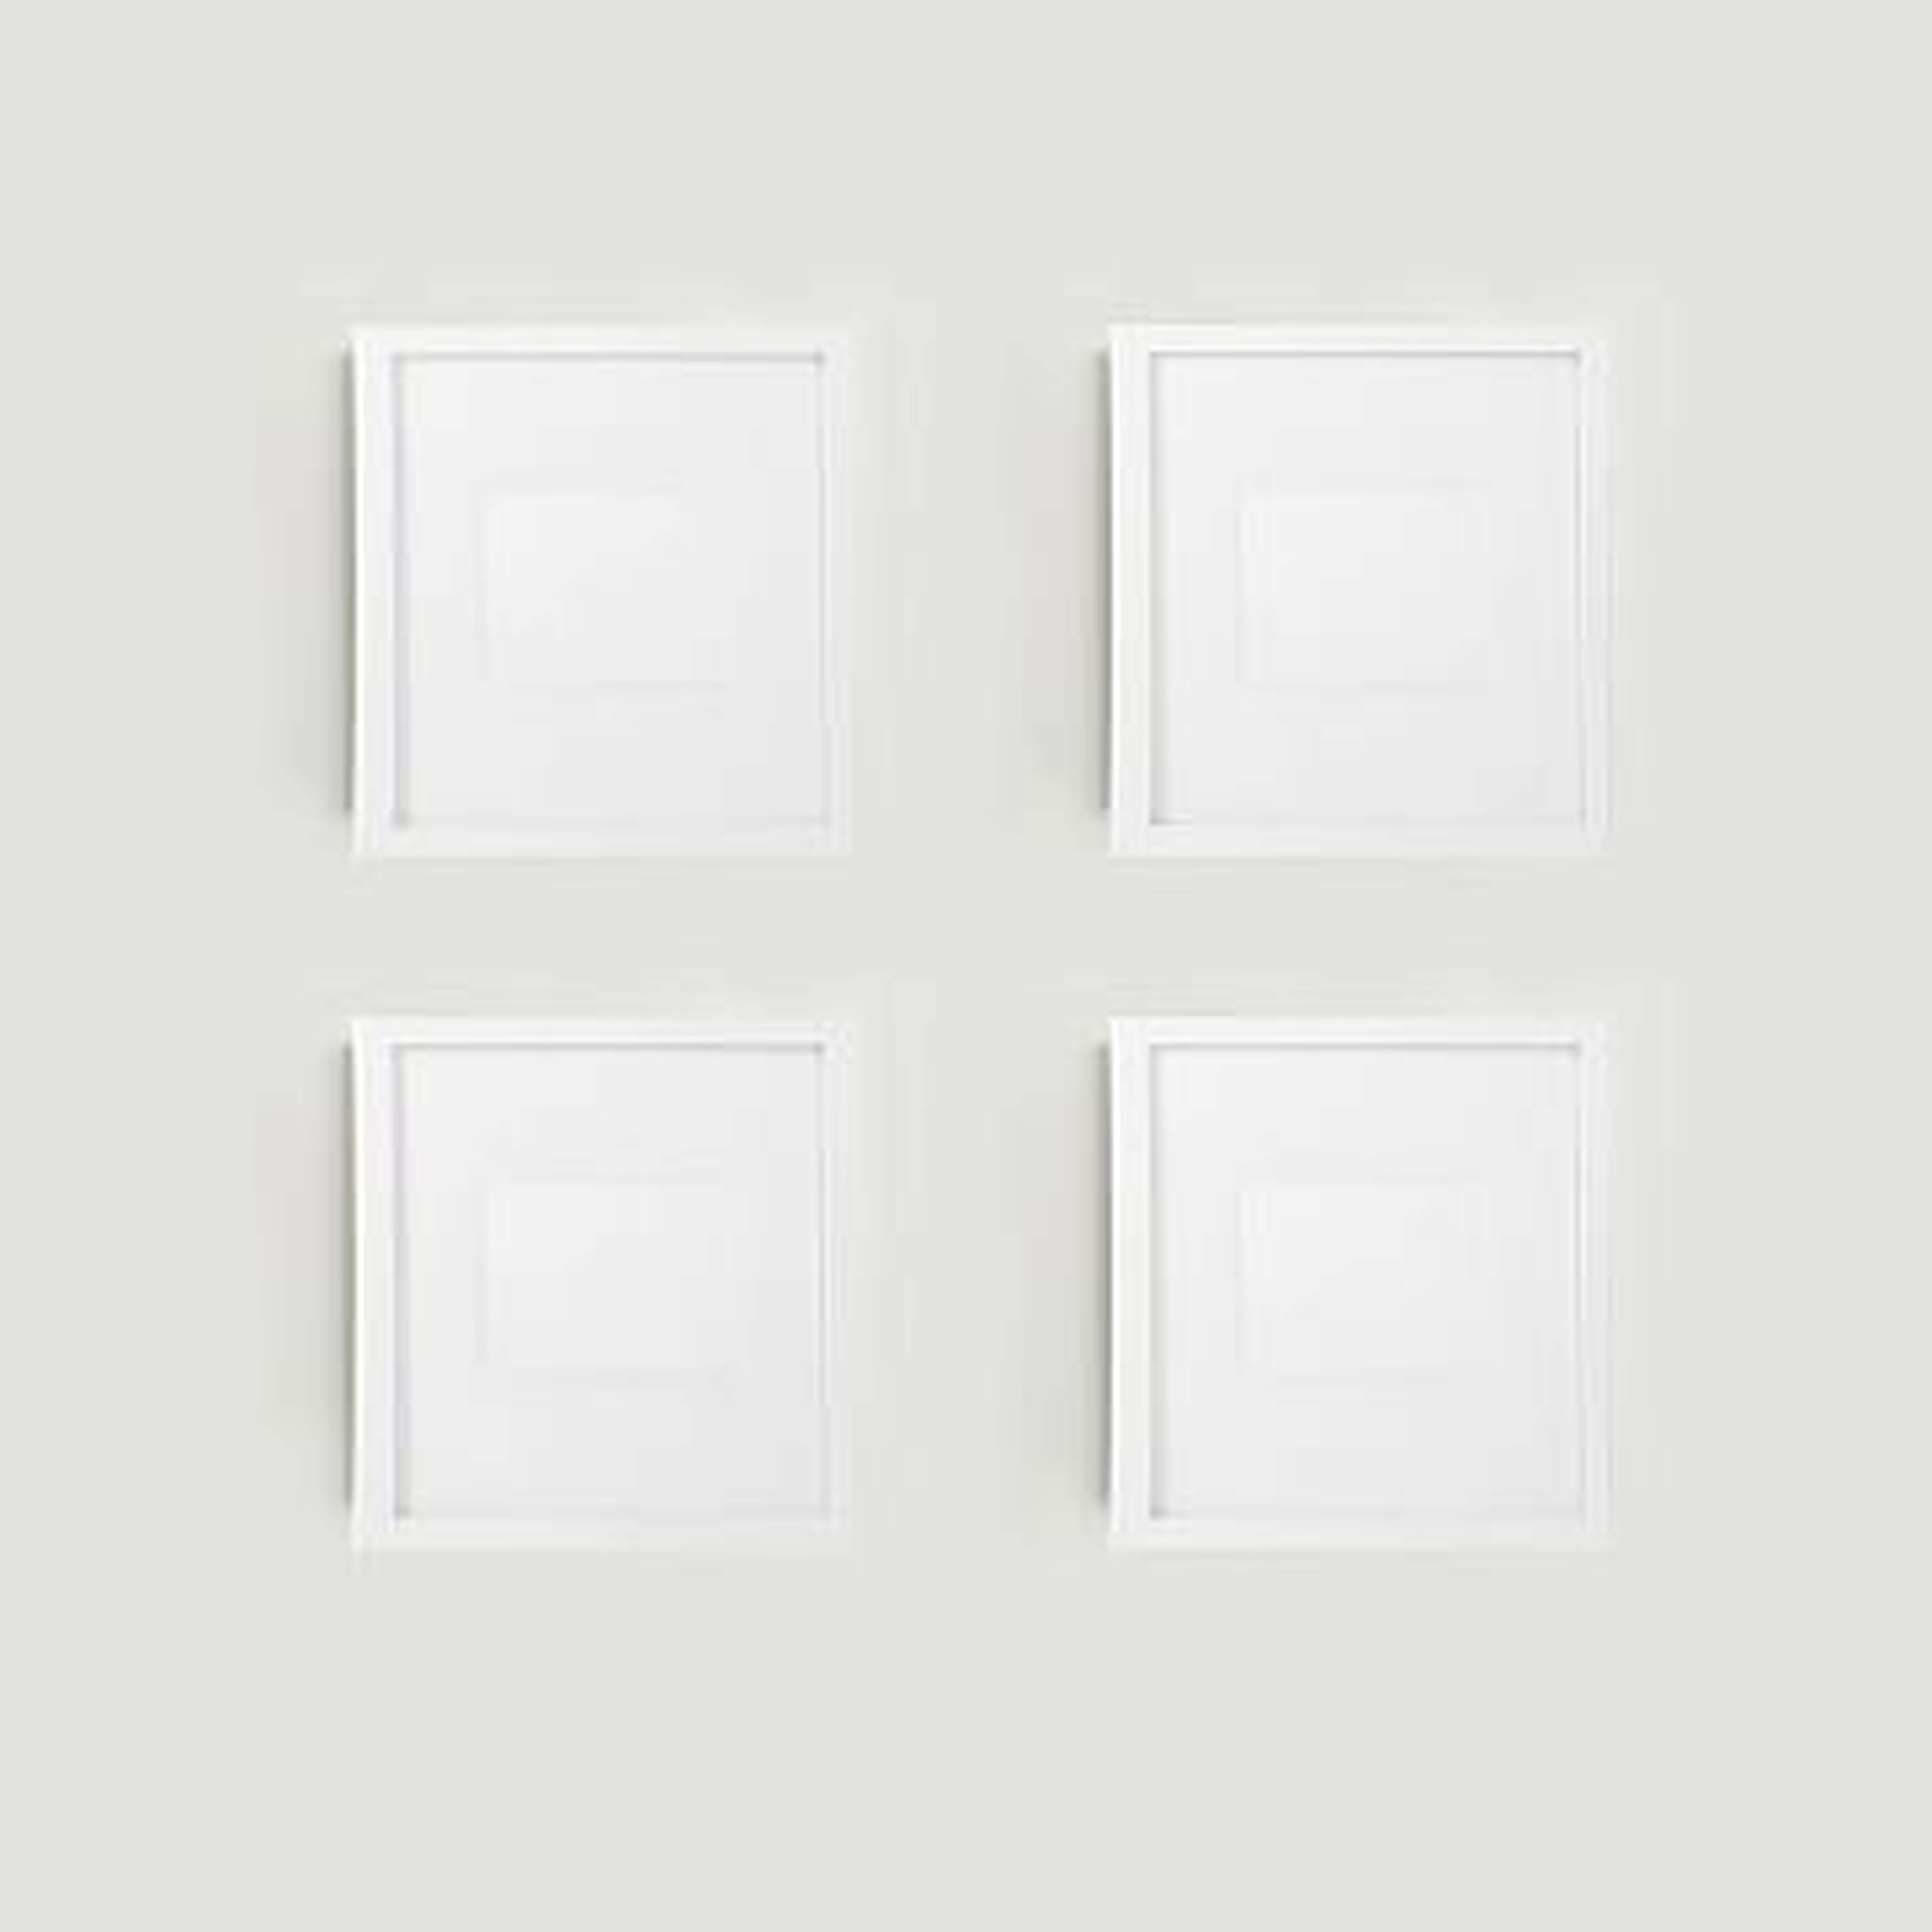 Gallery Frames, Set of 4, 13"x13", White Lacquer - West Elm